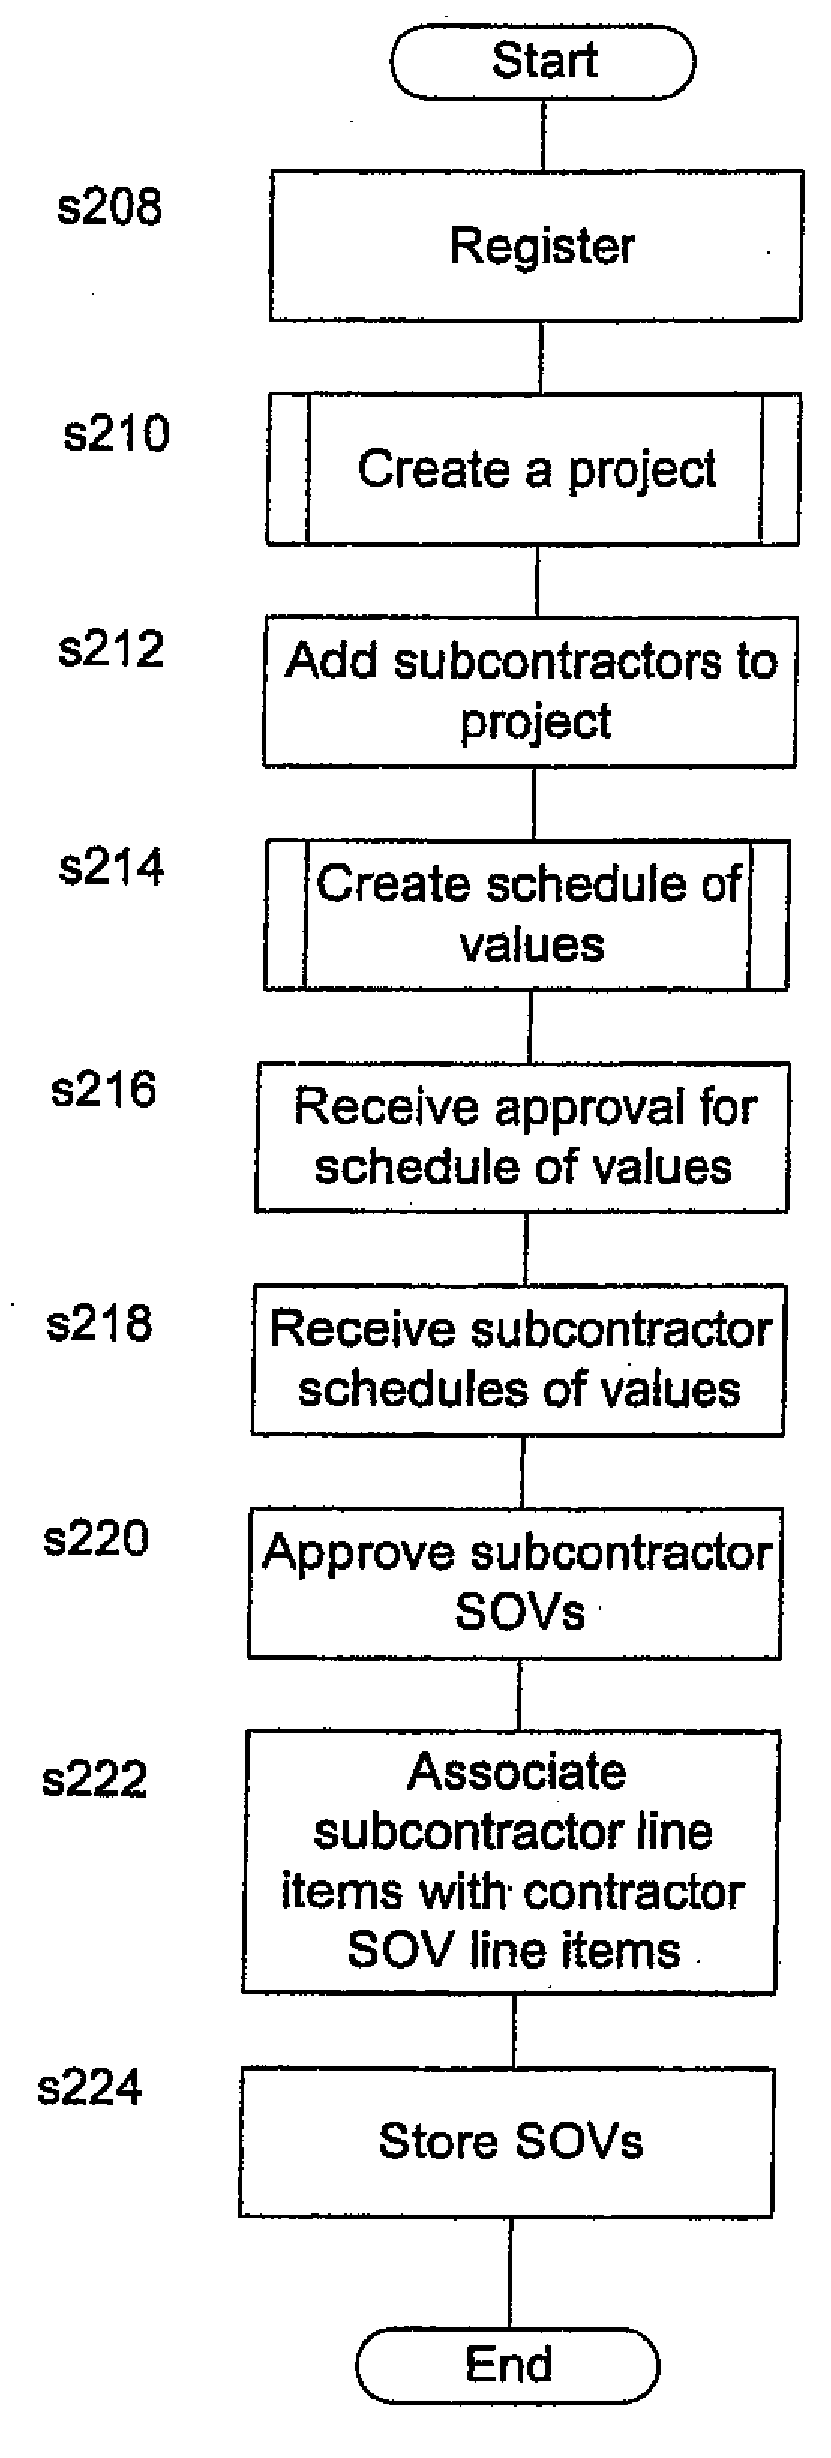 Administering contracts over data network